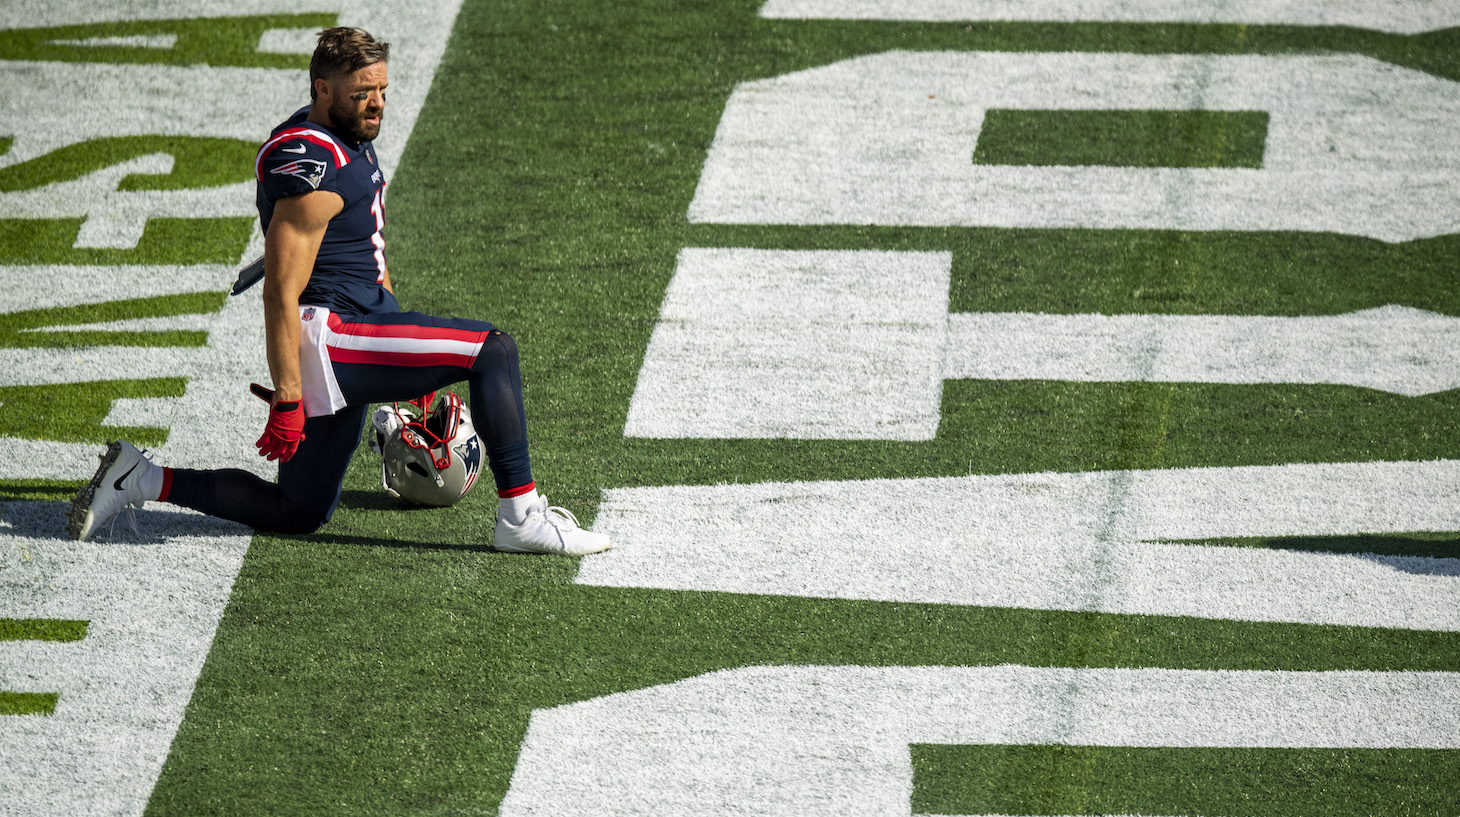 FOXBOROUGH, MA - OCTOBER 18: Julian Edelman #11 of the New England Patriots looks on before a game against the Denver Broncos at Gillette Stadium on October 18, 2020 in Foxborough, Massachusetts. (Photo by Billie Weiss/Getty Images) *** Local Caption *** Julian Edelman